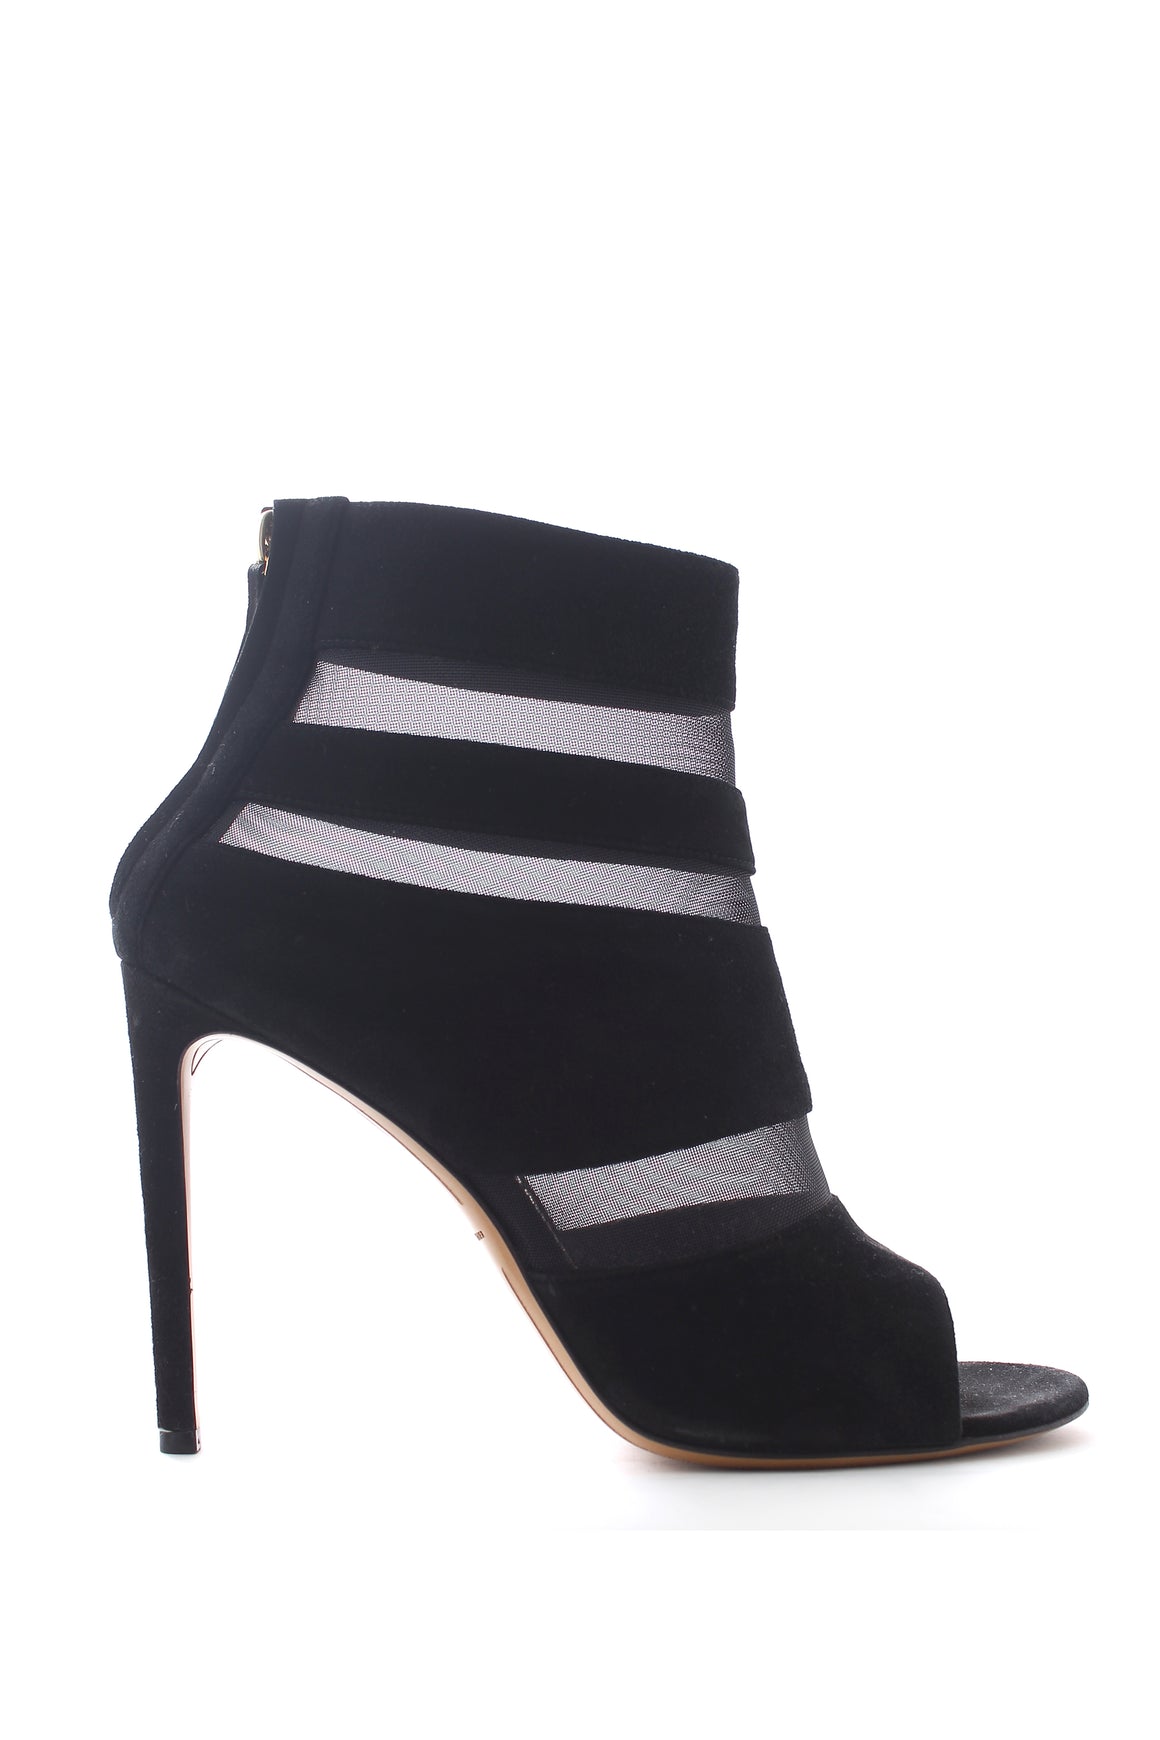 Alexandre Vauthier Mesh-Panelled Suede Open-Toe Ankle Boots